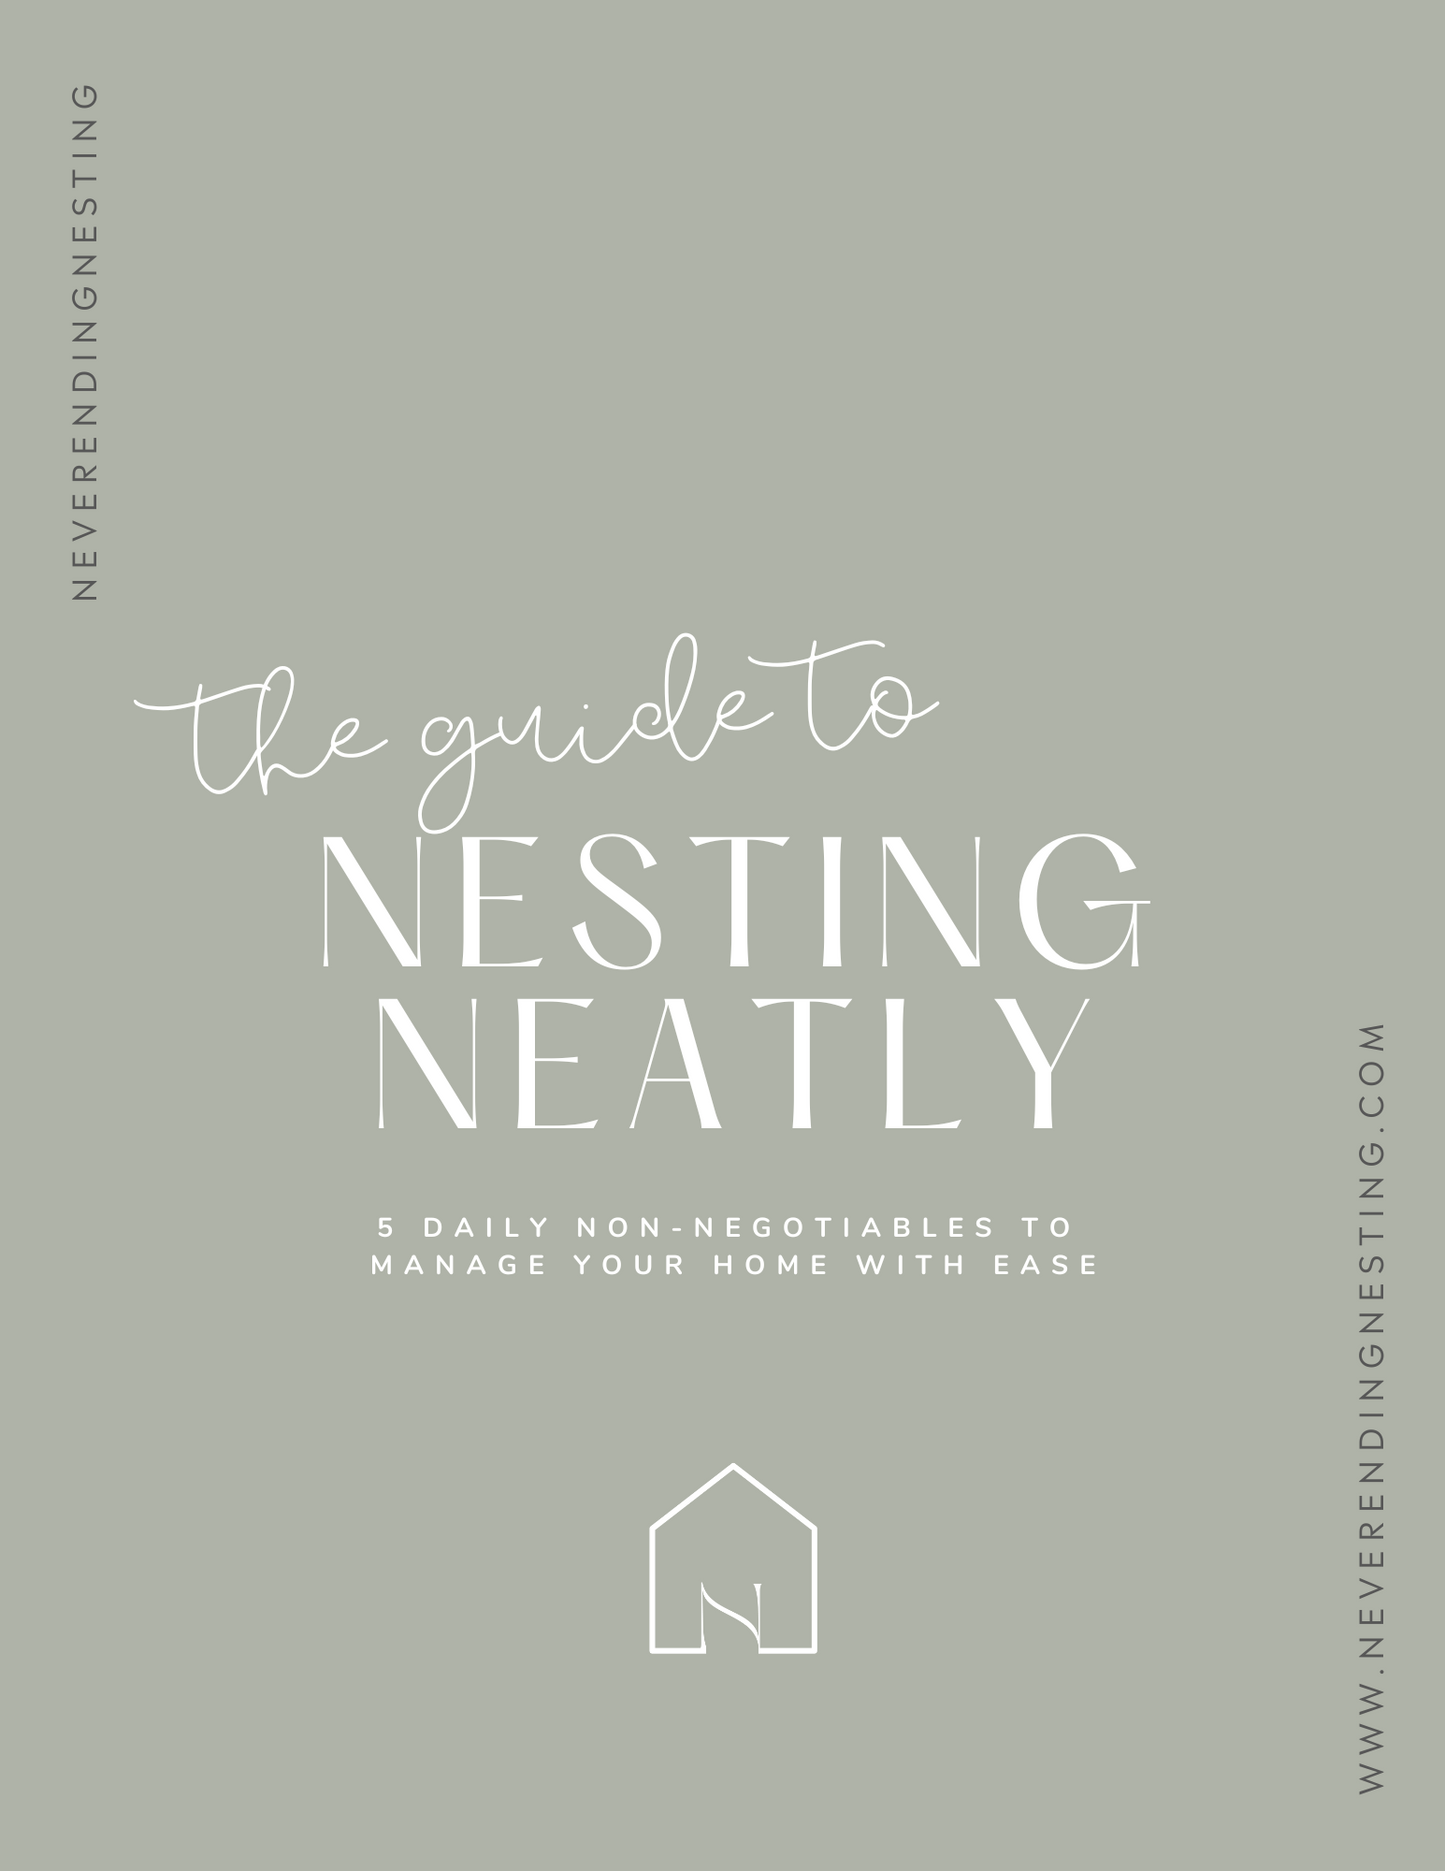 THE GUIDE TO NESTING NEATLY